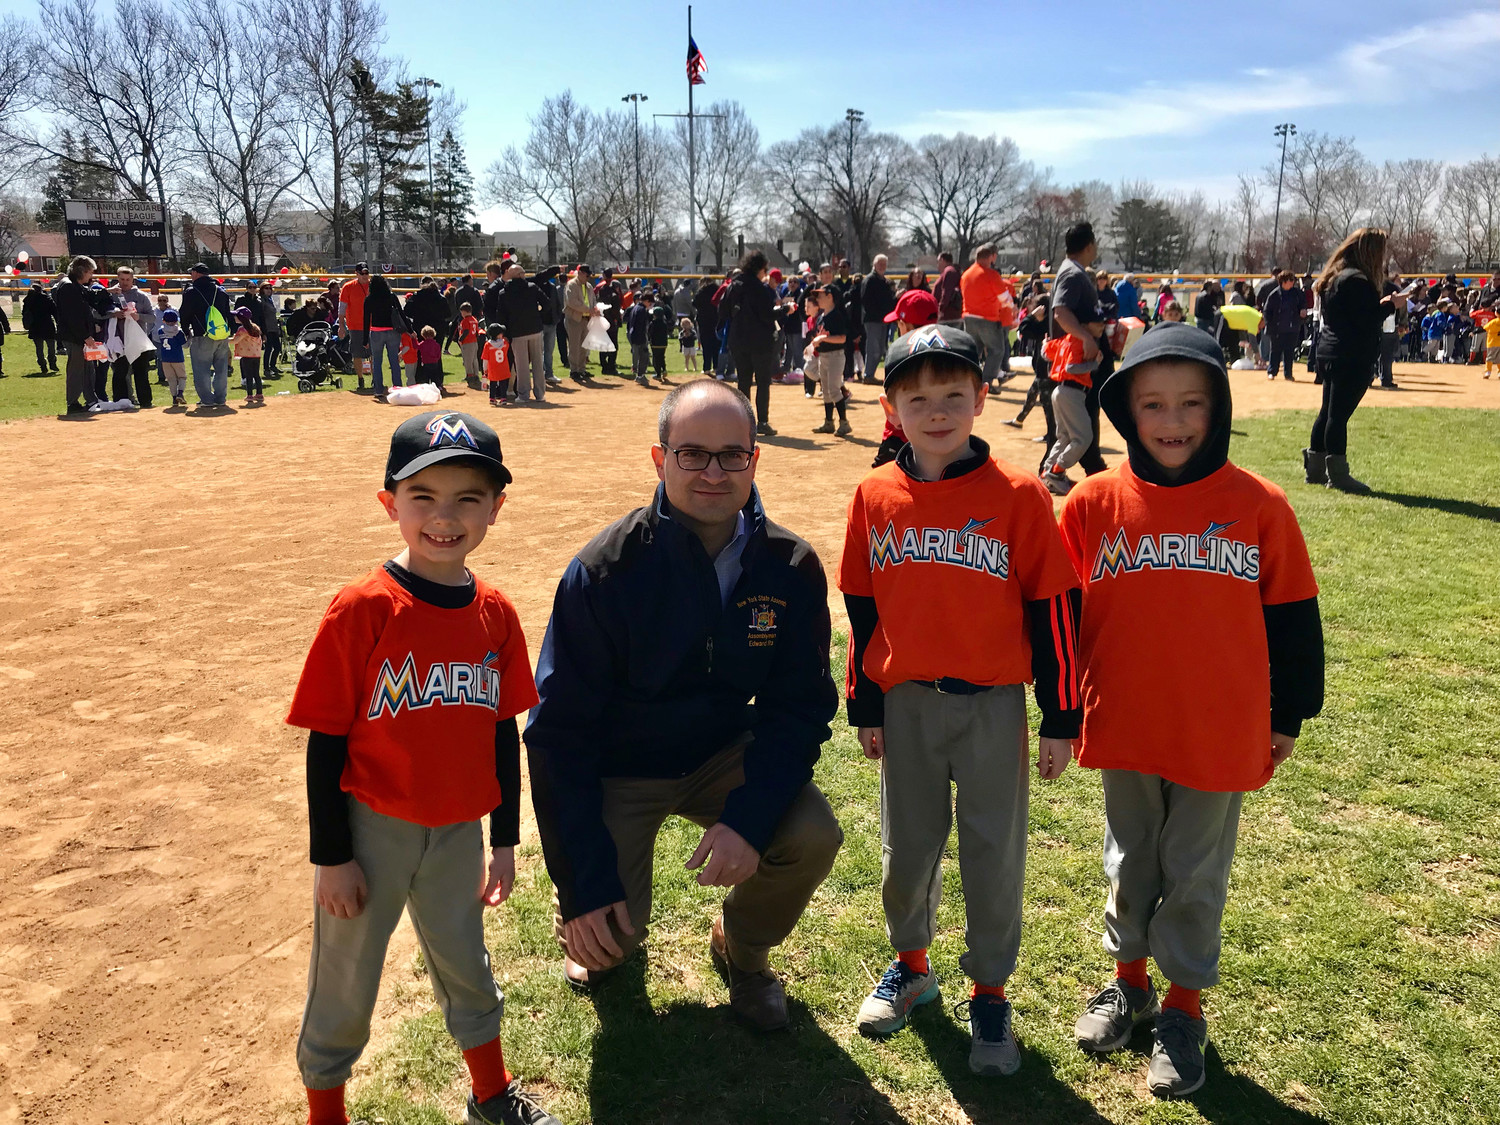 State Assemblyman Edward Ra, who is running for re-election, with three members of the Franklin Square Marlins Little League team earlier this year.